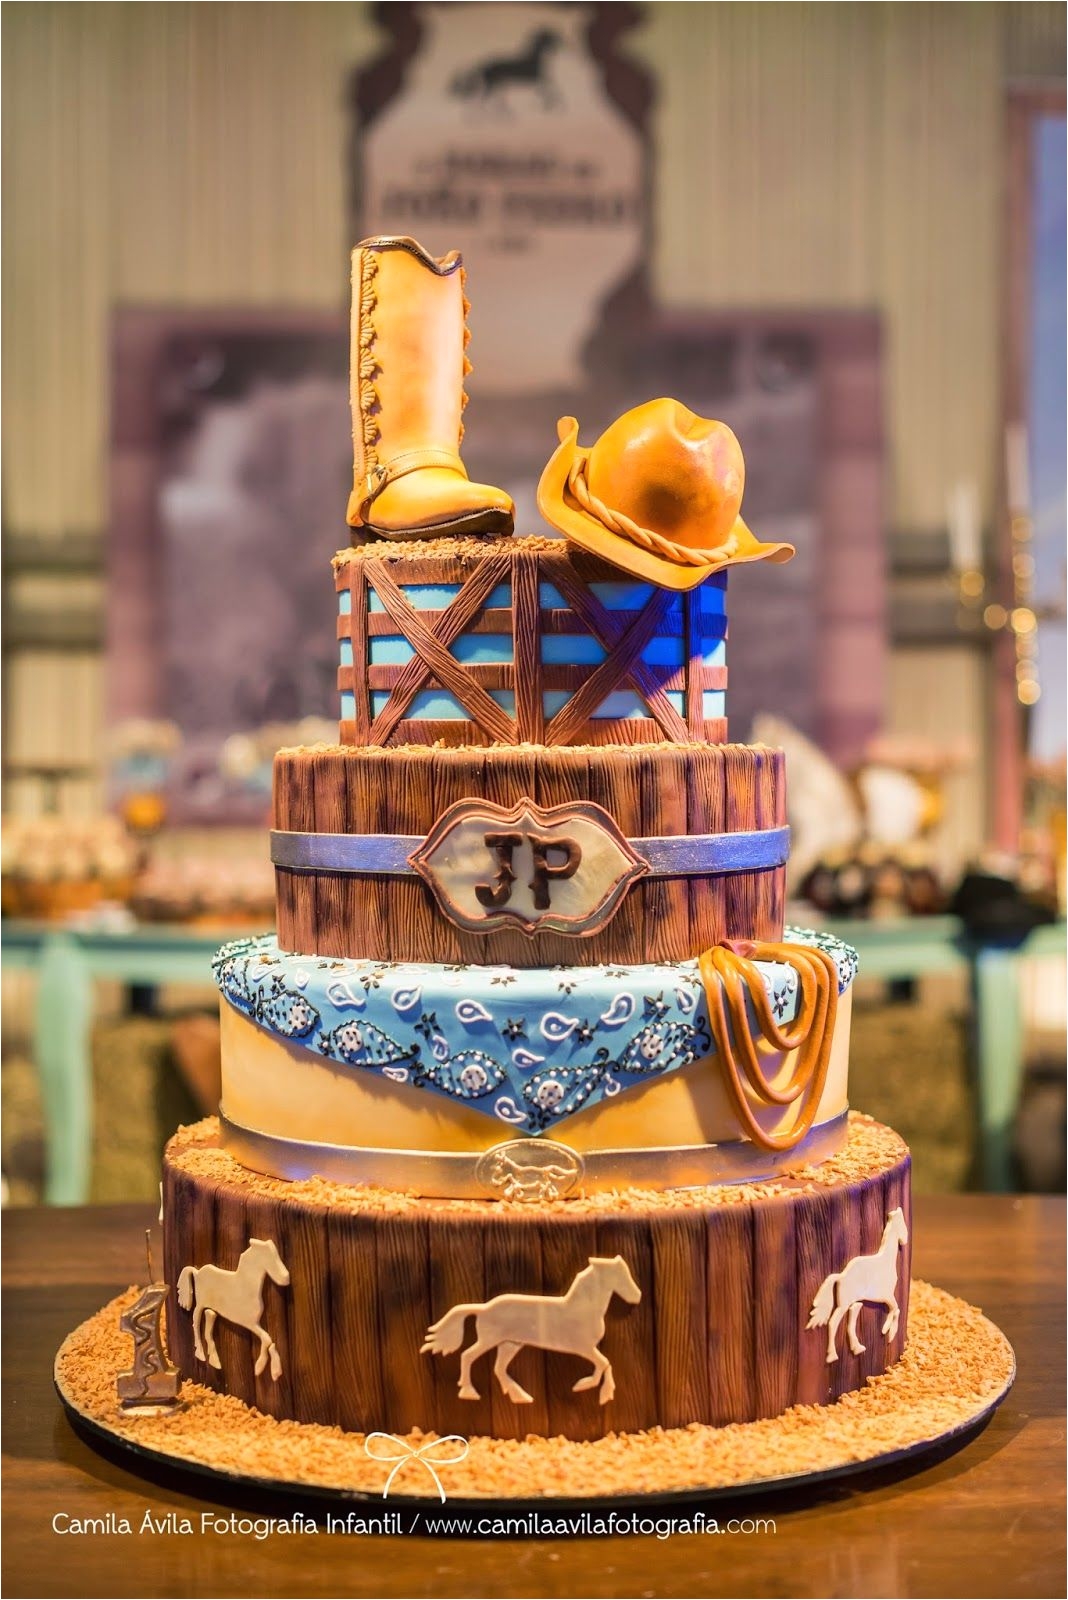 cowboy cake ideas for all your cake decorating supplies please visit craftcompany co uk